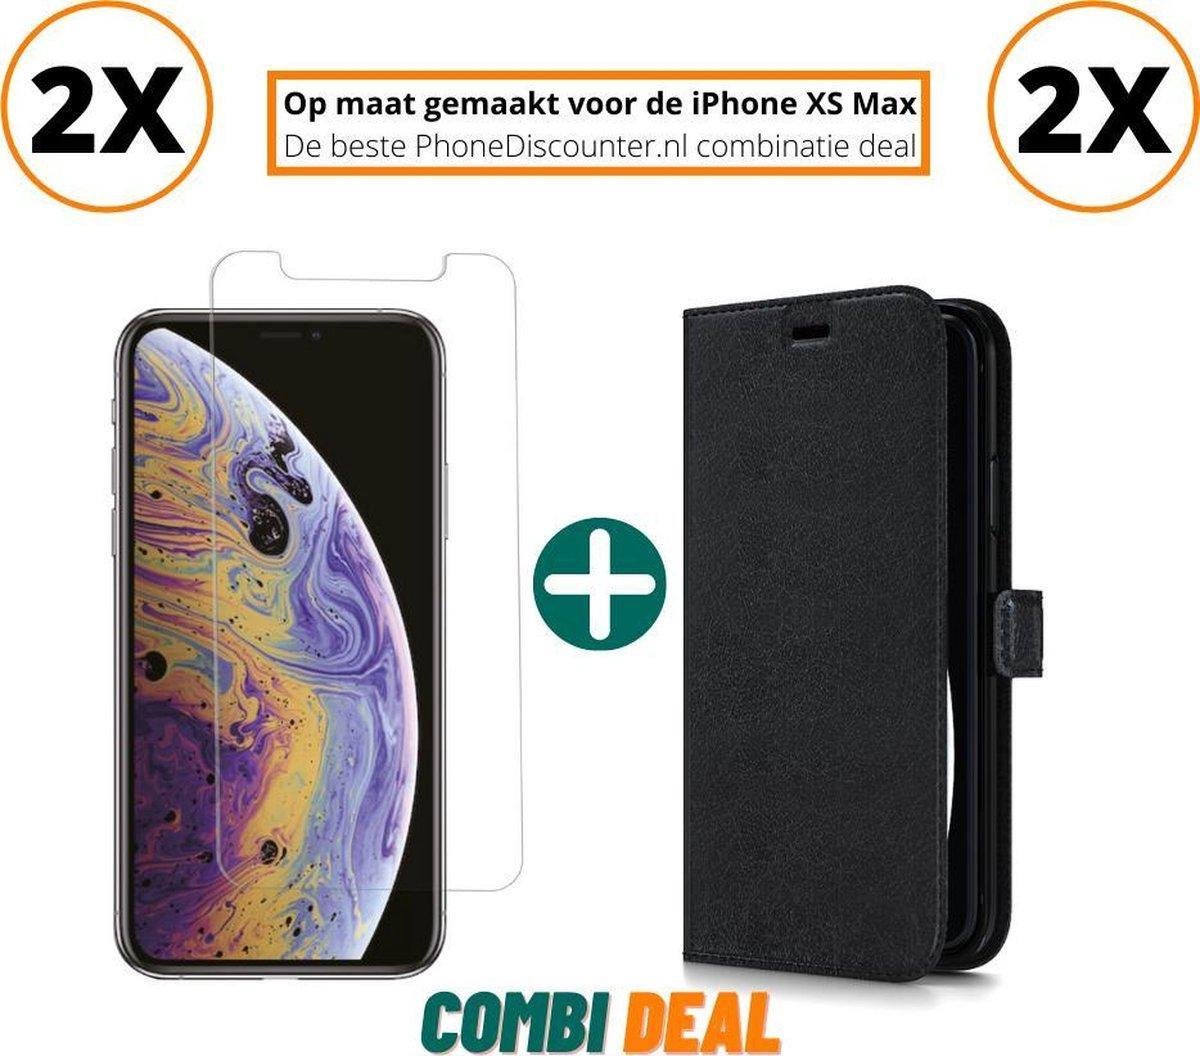 iphone xs max hoesje zwart | iPhone XS Max A2101 beschermhoes full body 2x | iPhone XS Max wallet hoes zwart | 2x hoesje iphone xs max apple | iPhone XS Max boekhoesje + 2x iPhone XS Max tempered glass screenprotector